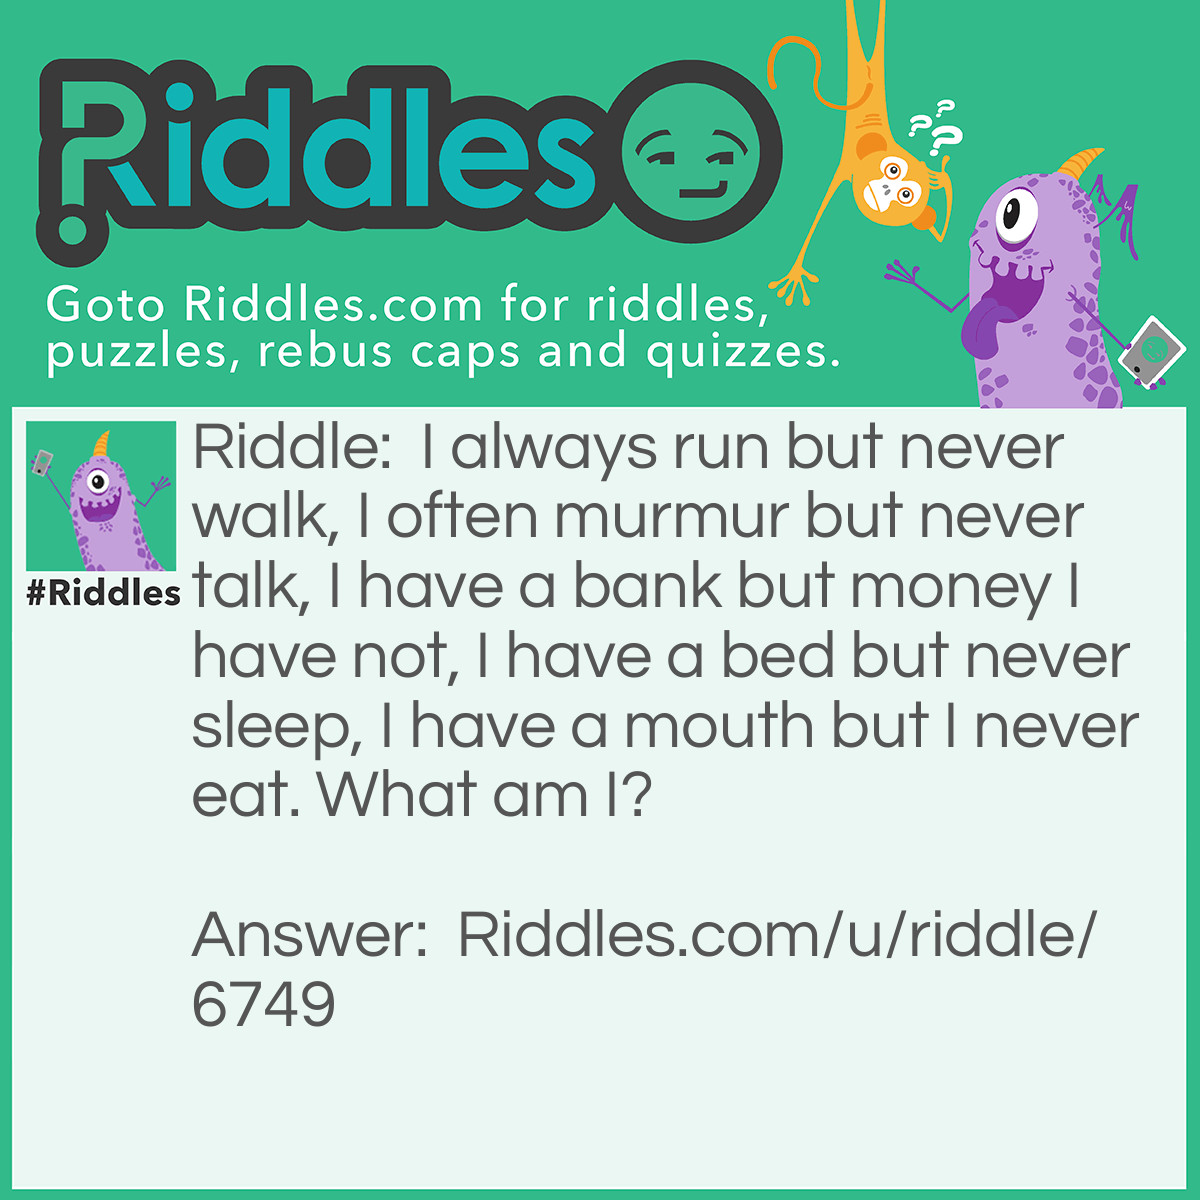 Riddle: I always run but never walk, I often murmur but never talk, I have a bank but money I have not, I have a bed but never sleep, I have a mouth but I never eat. What am I? Answer: A river.